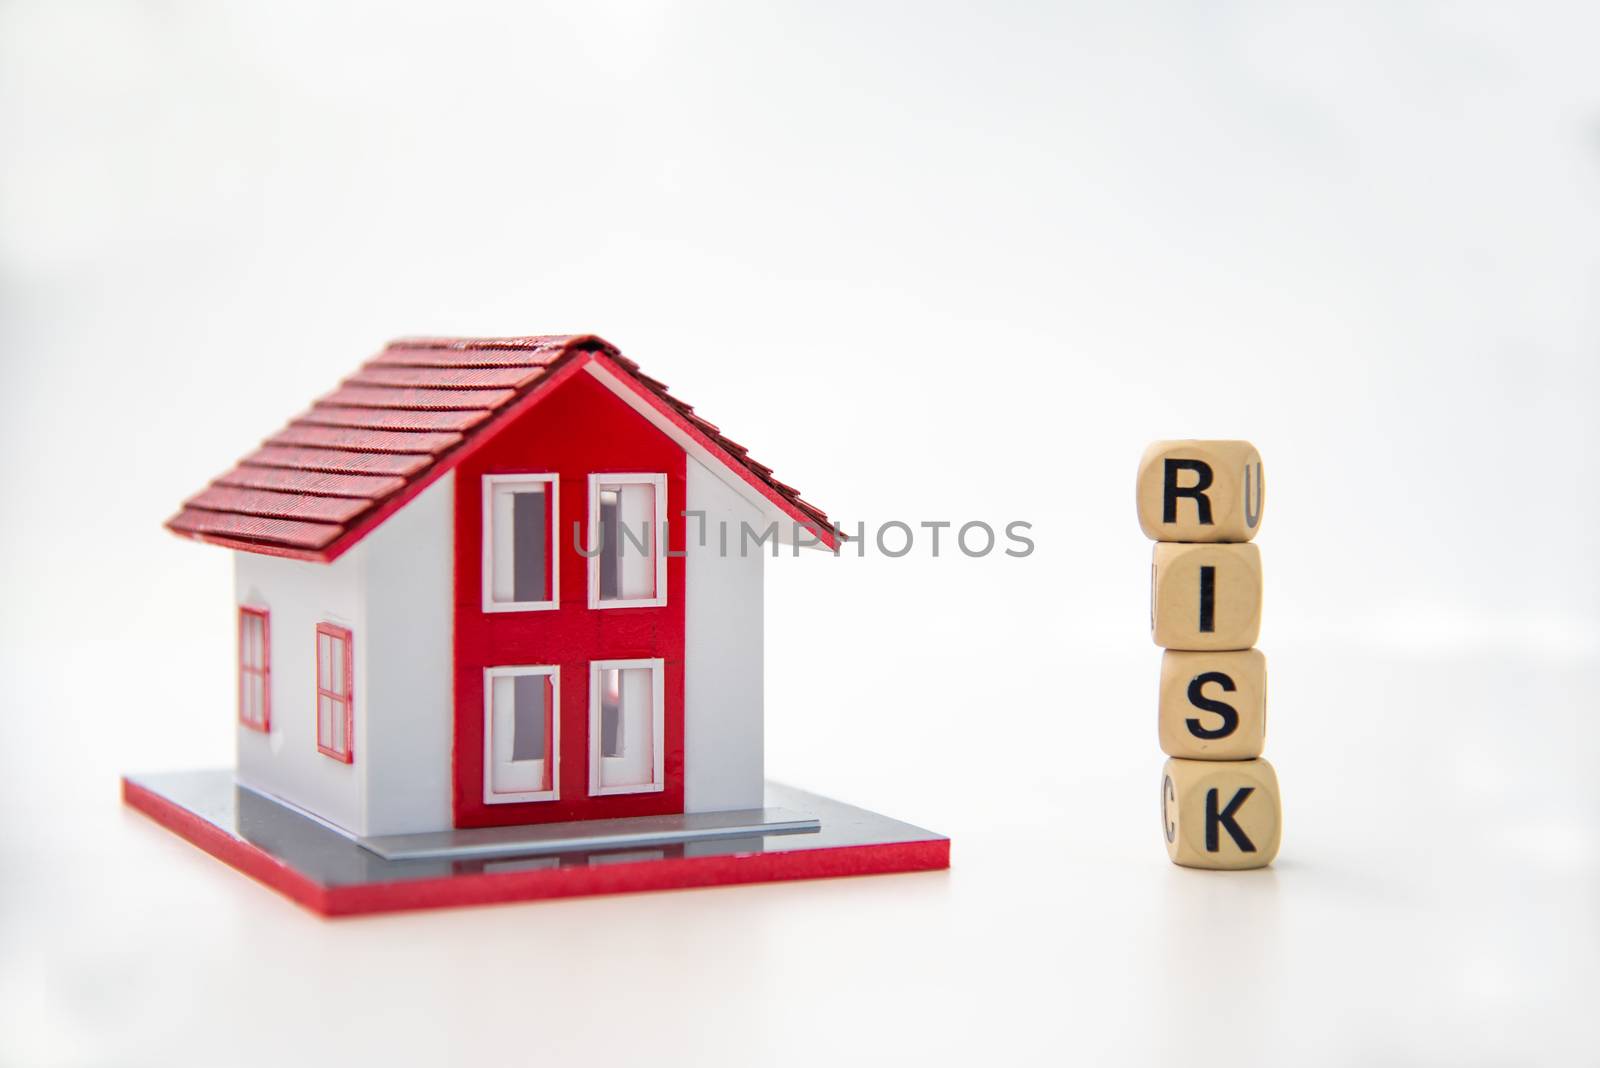 wooden block with the word "RISK" and model house on white backg by photobyphotoboy